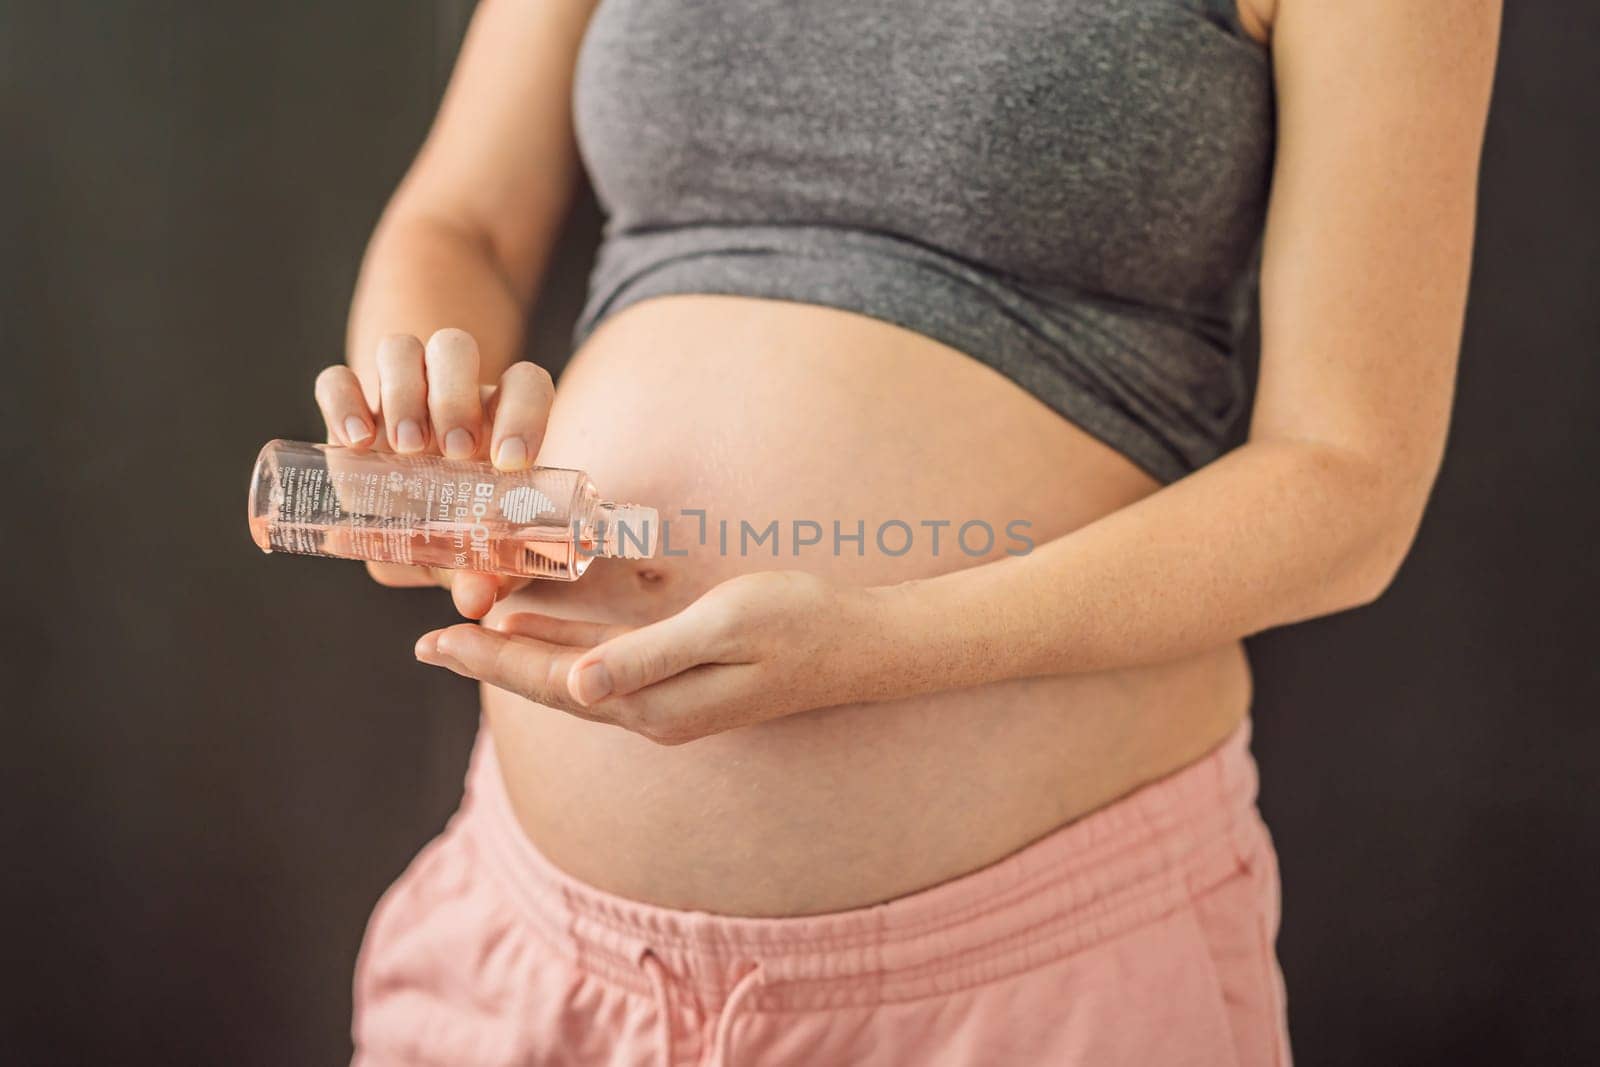 Turkiye, Antalya 02.02.2022: Woman holds Bio Oil, a nurturing choice for pregnant women. A soothing image of care and wellness during pregnancy by galitskaya